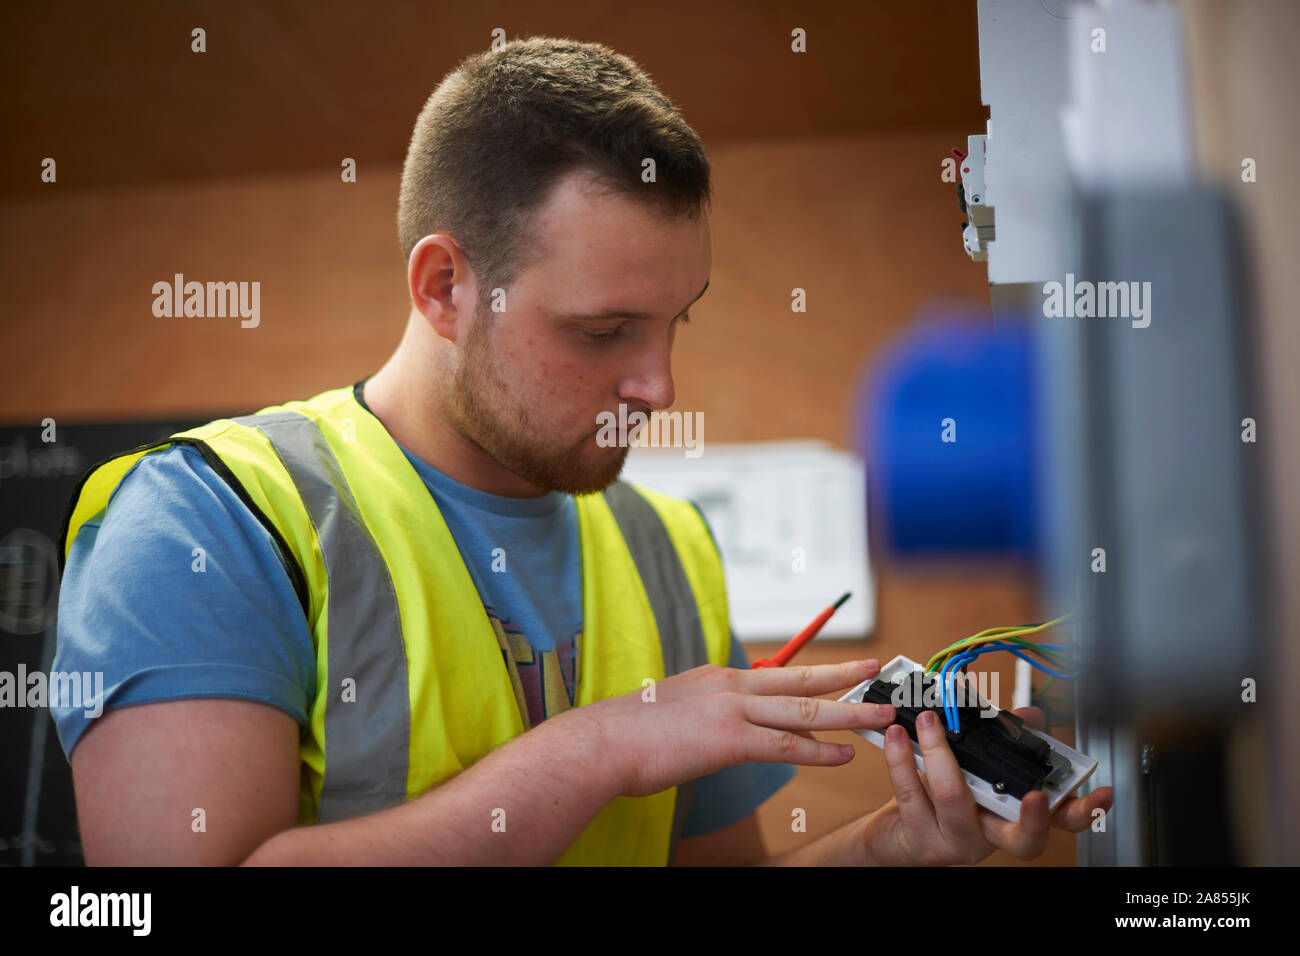 Male electrician student examining light switch in workshop Stock Photo